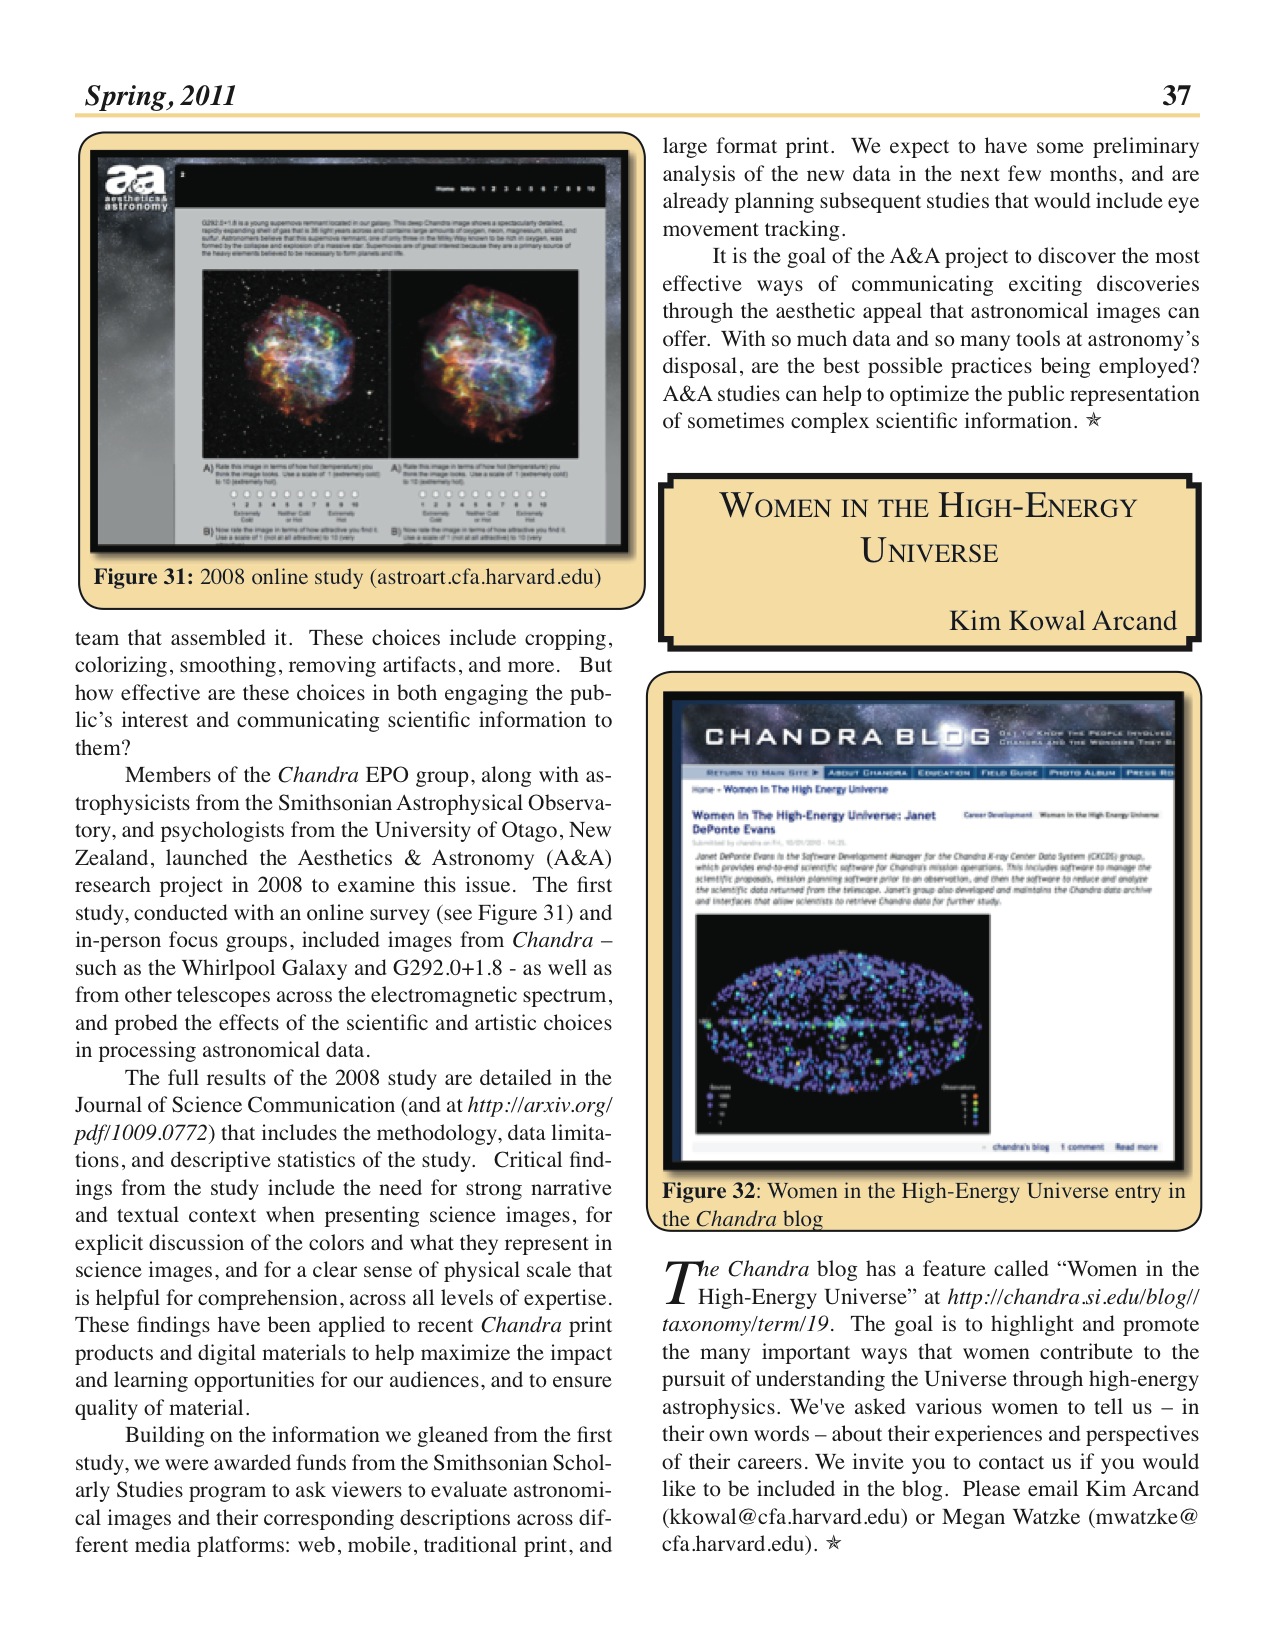 Page 37 of the Chandra Newsletter, issue 18.